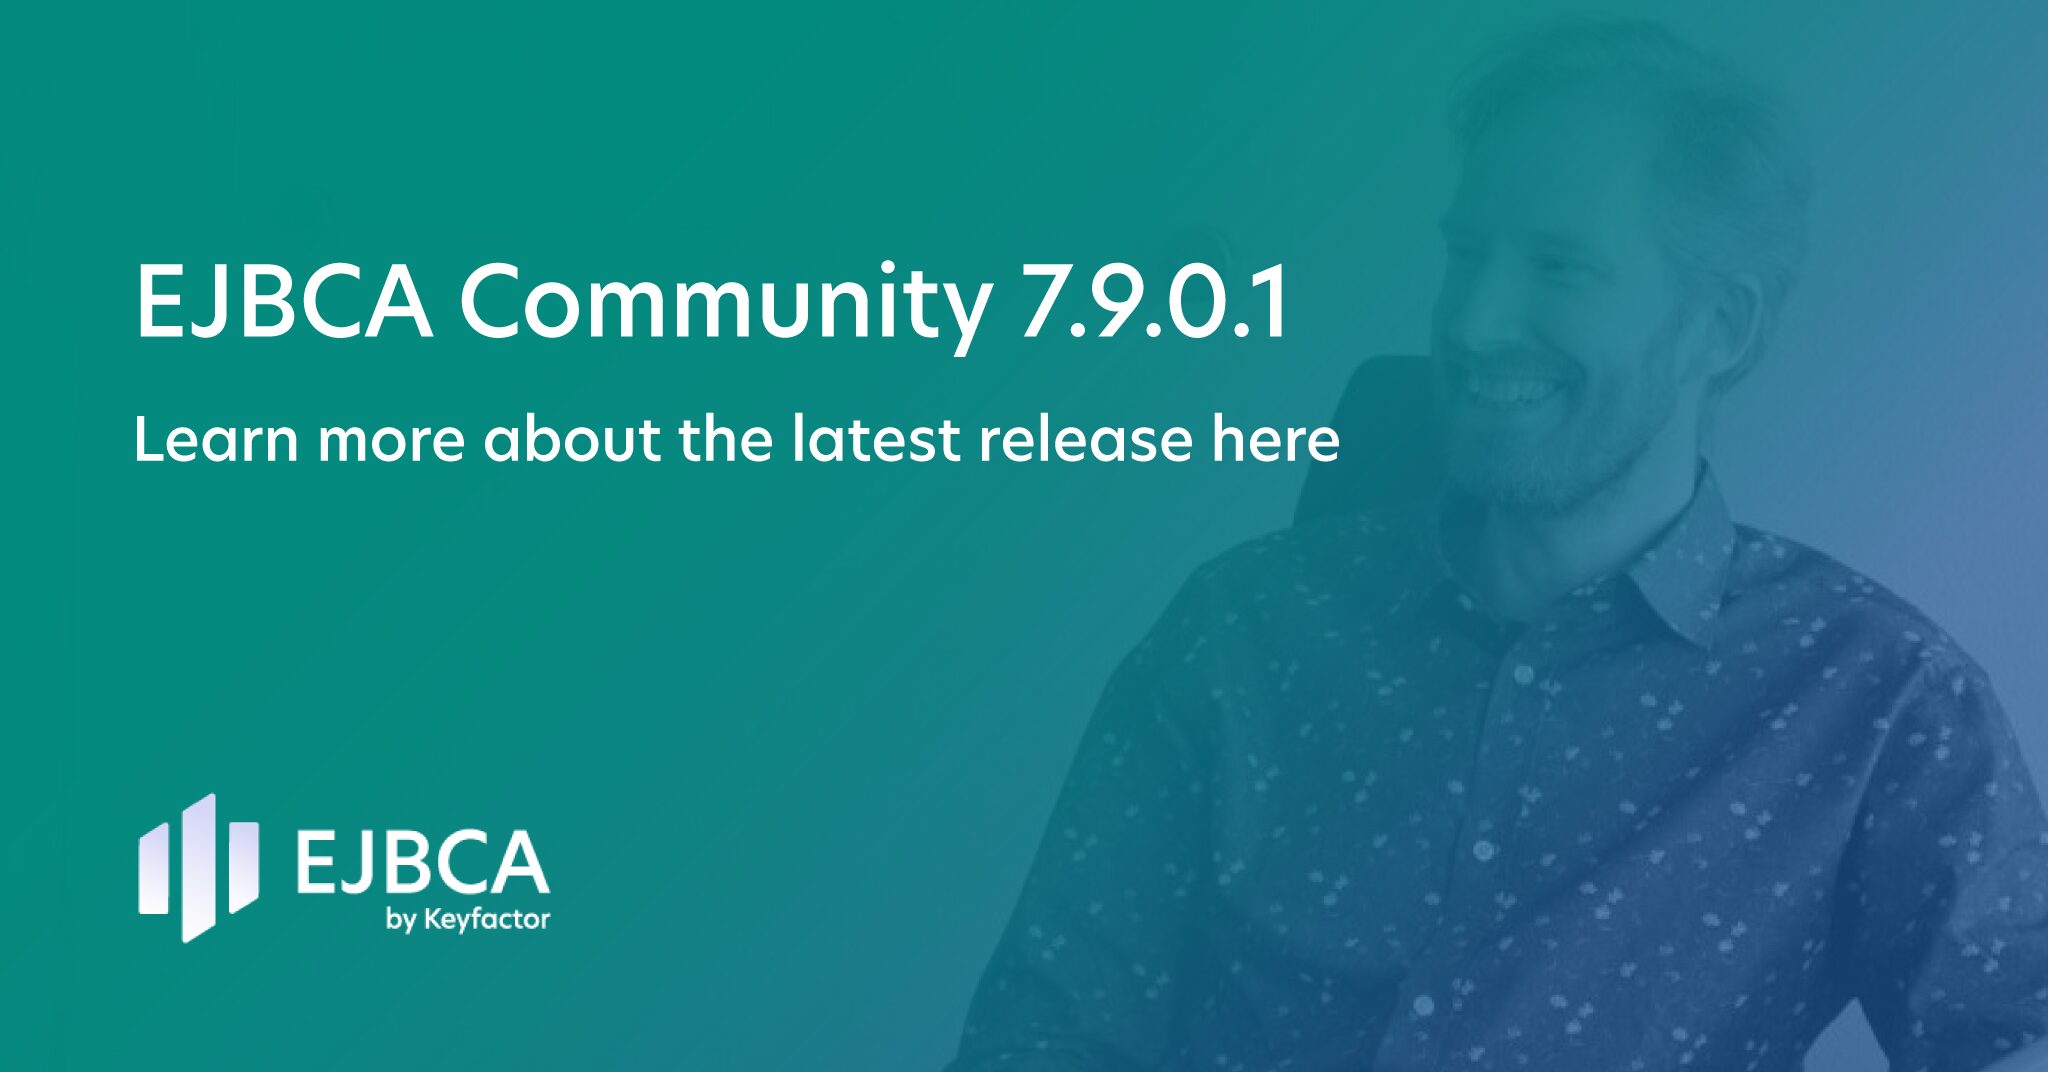 New REST API Support and More Frequent Releases From EJBCA Community 7.9.0.1